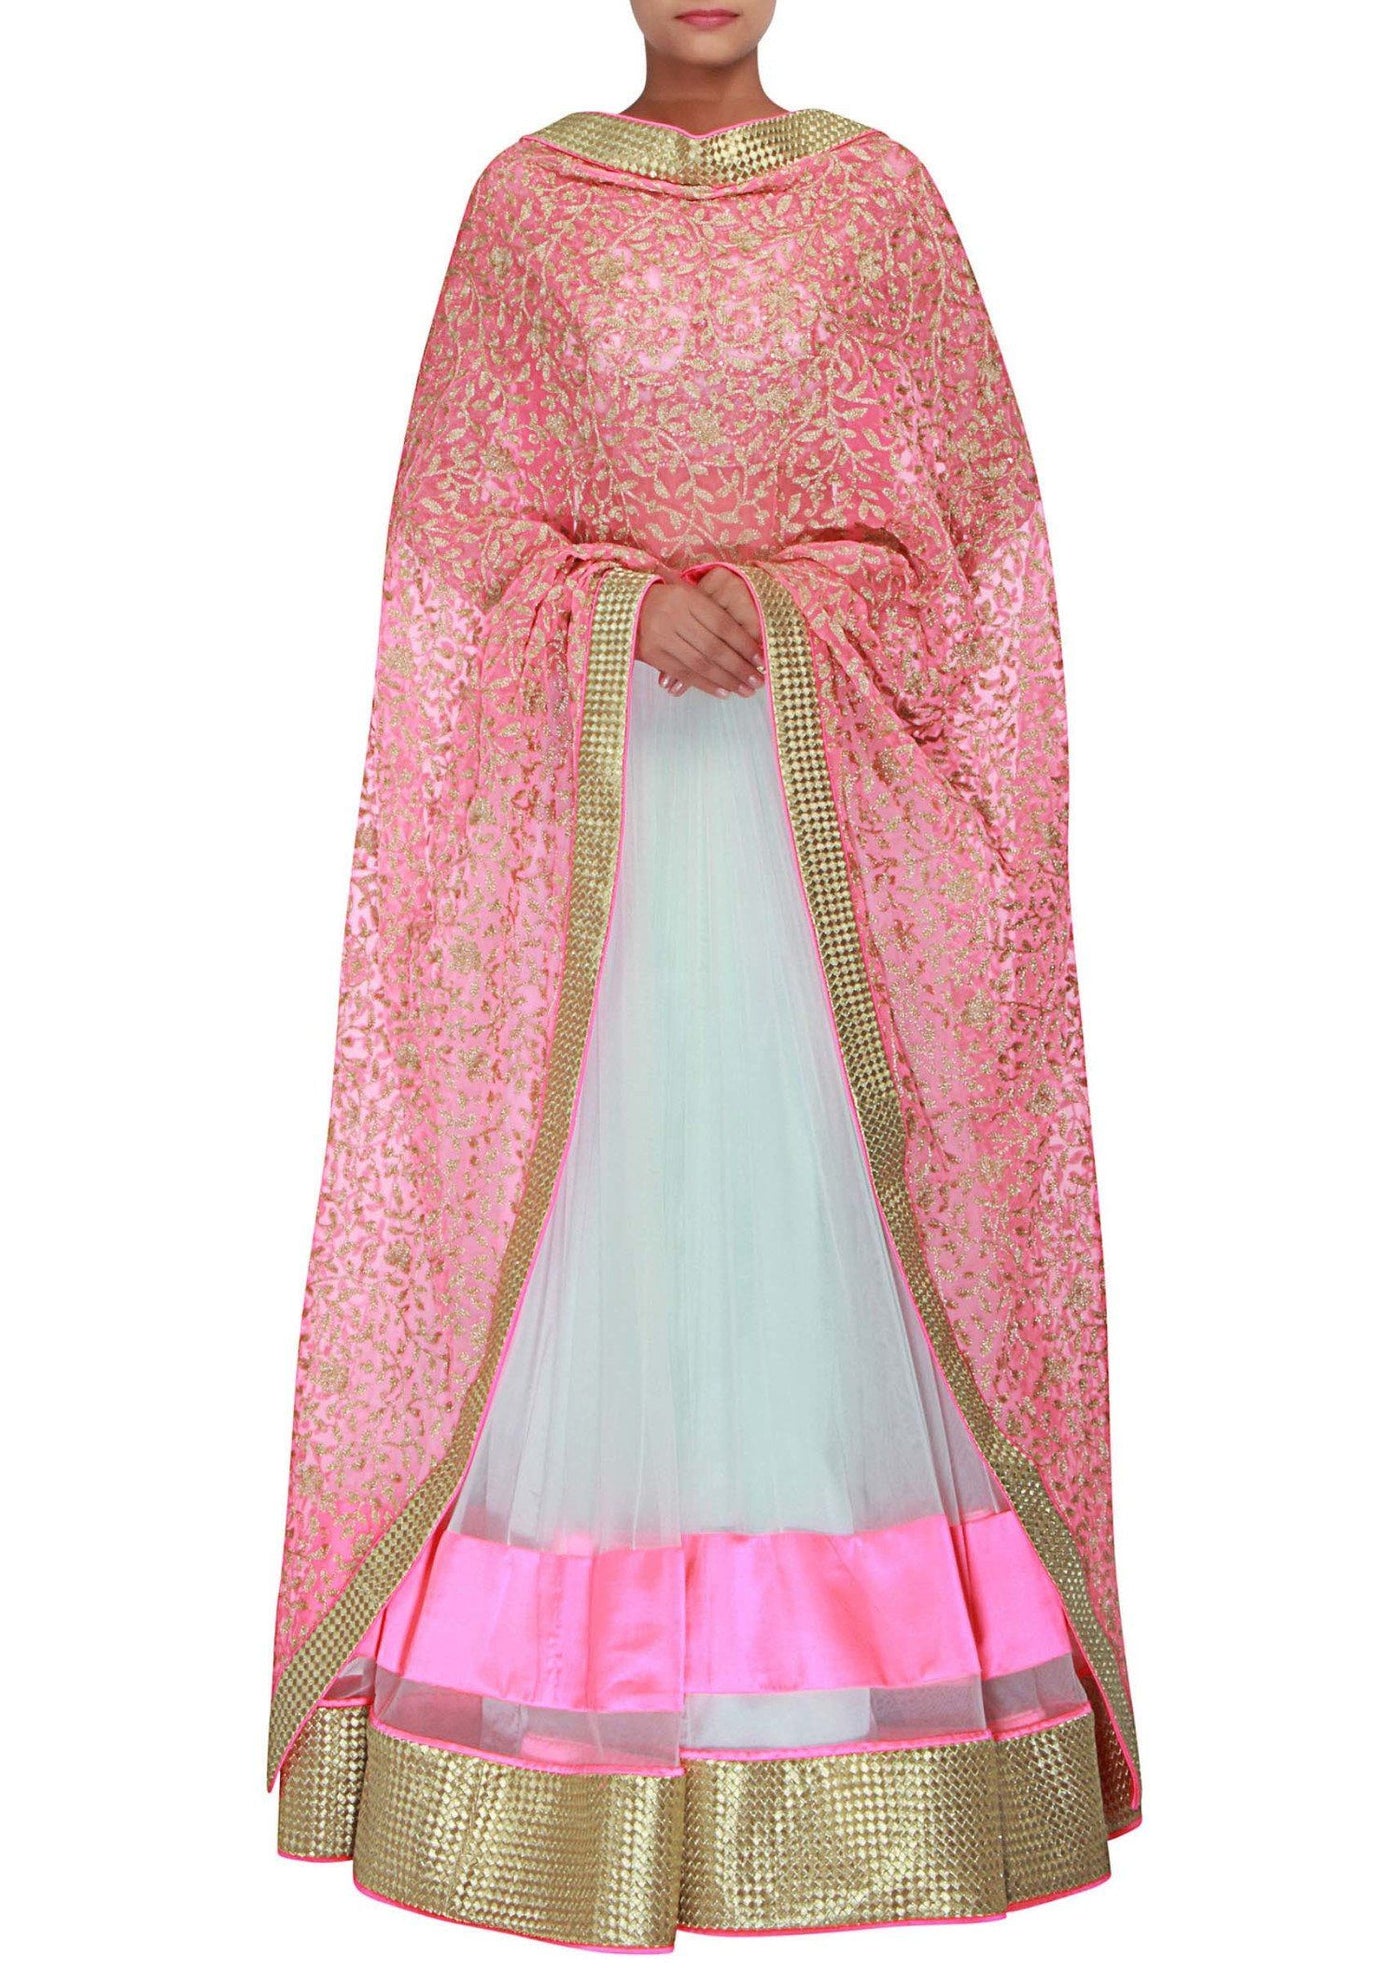 Pink and Magenta Net Lehenga - Indian Clothing in Denver, CO, Aurora, CO, Boulder, CO, Fort Collins, CO, Colorado Springs, CO, Parker, CO, Highlands Ranch, CO, Cherry Creek, CO, Centennial, CO, and Longmont, CO. Nationwide shipping USA - India Fashion X